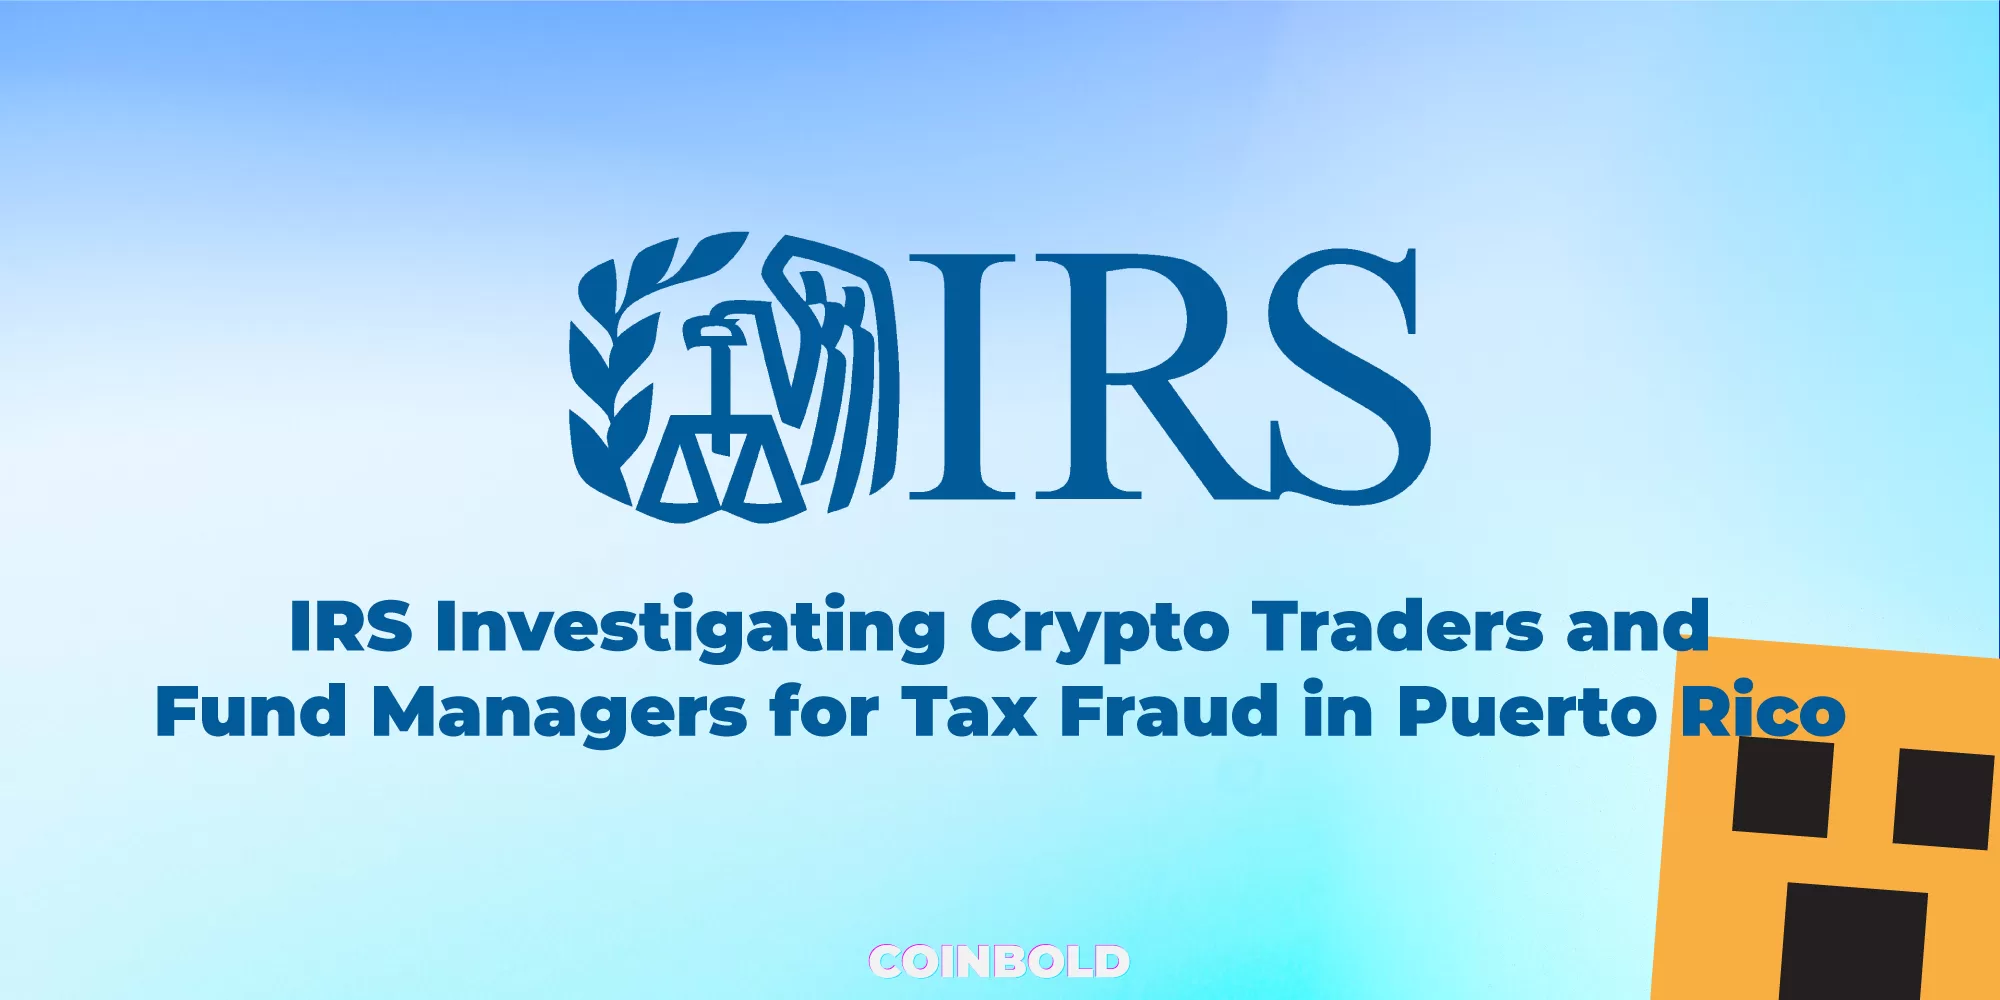 IRS Investigating Crypto Traders and Fund Managers for Tax Fraud in Puerto Rico